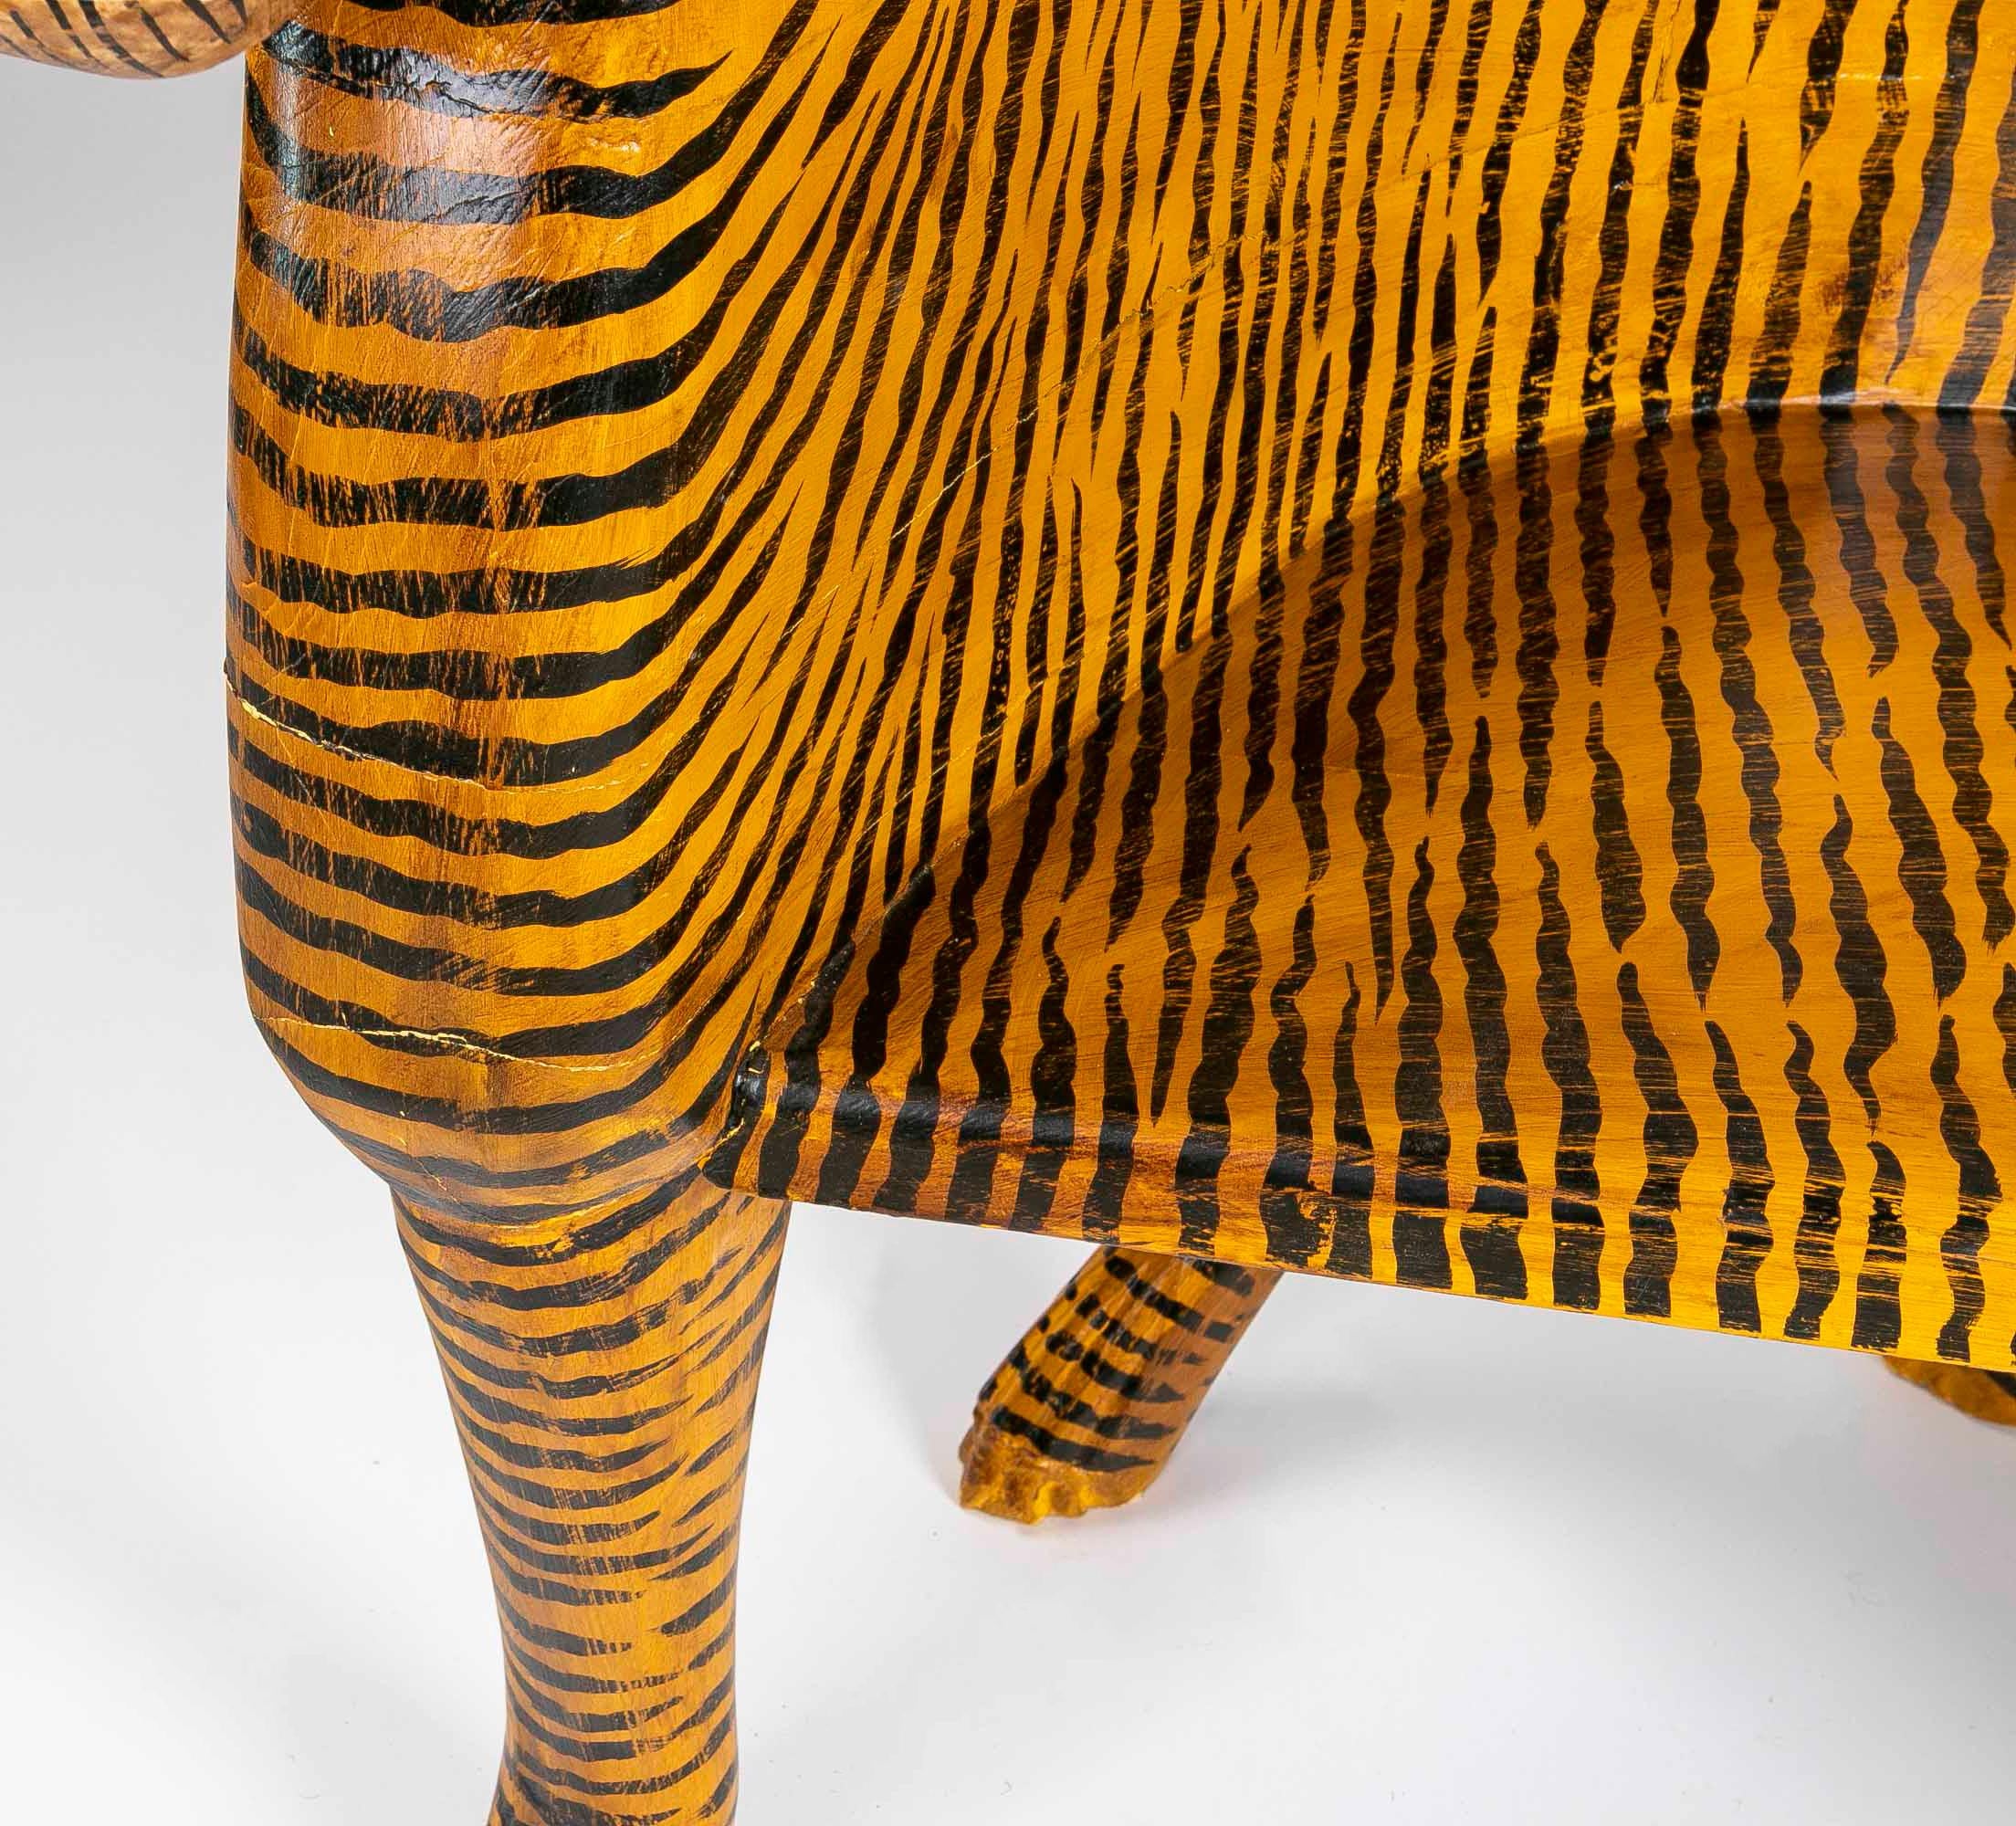 European Hand-Painted Wooden Tiger Armchair